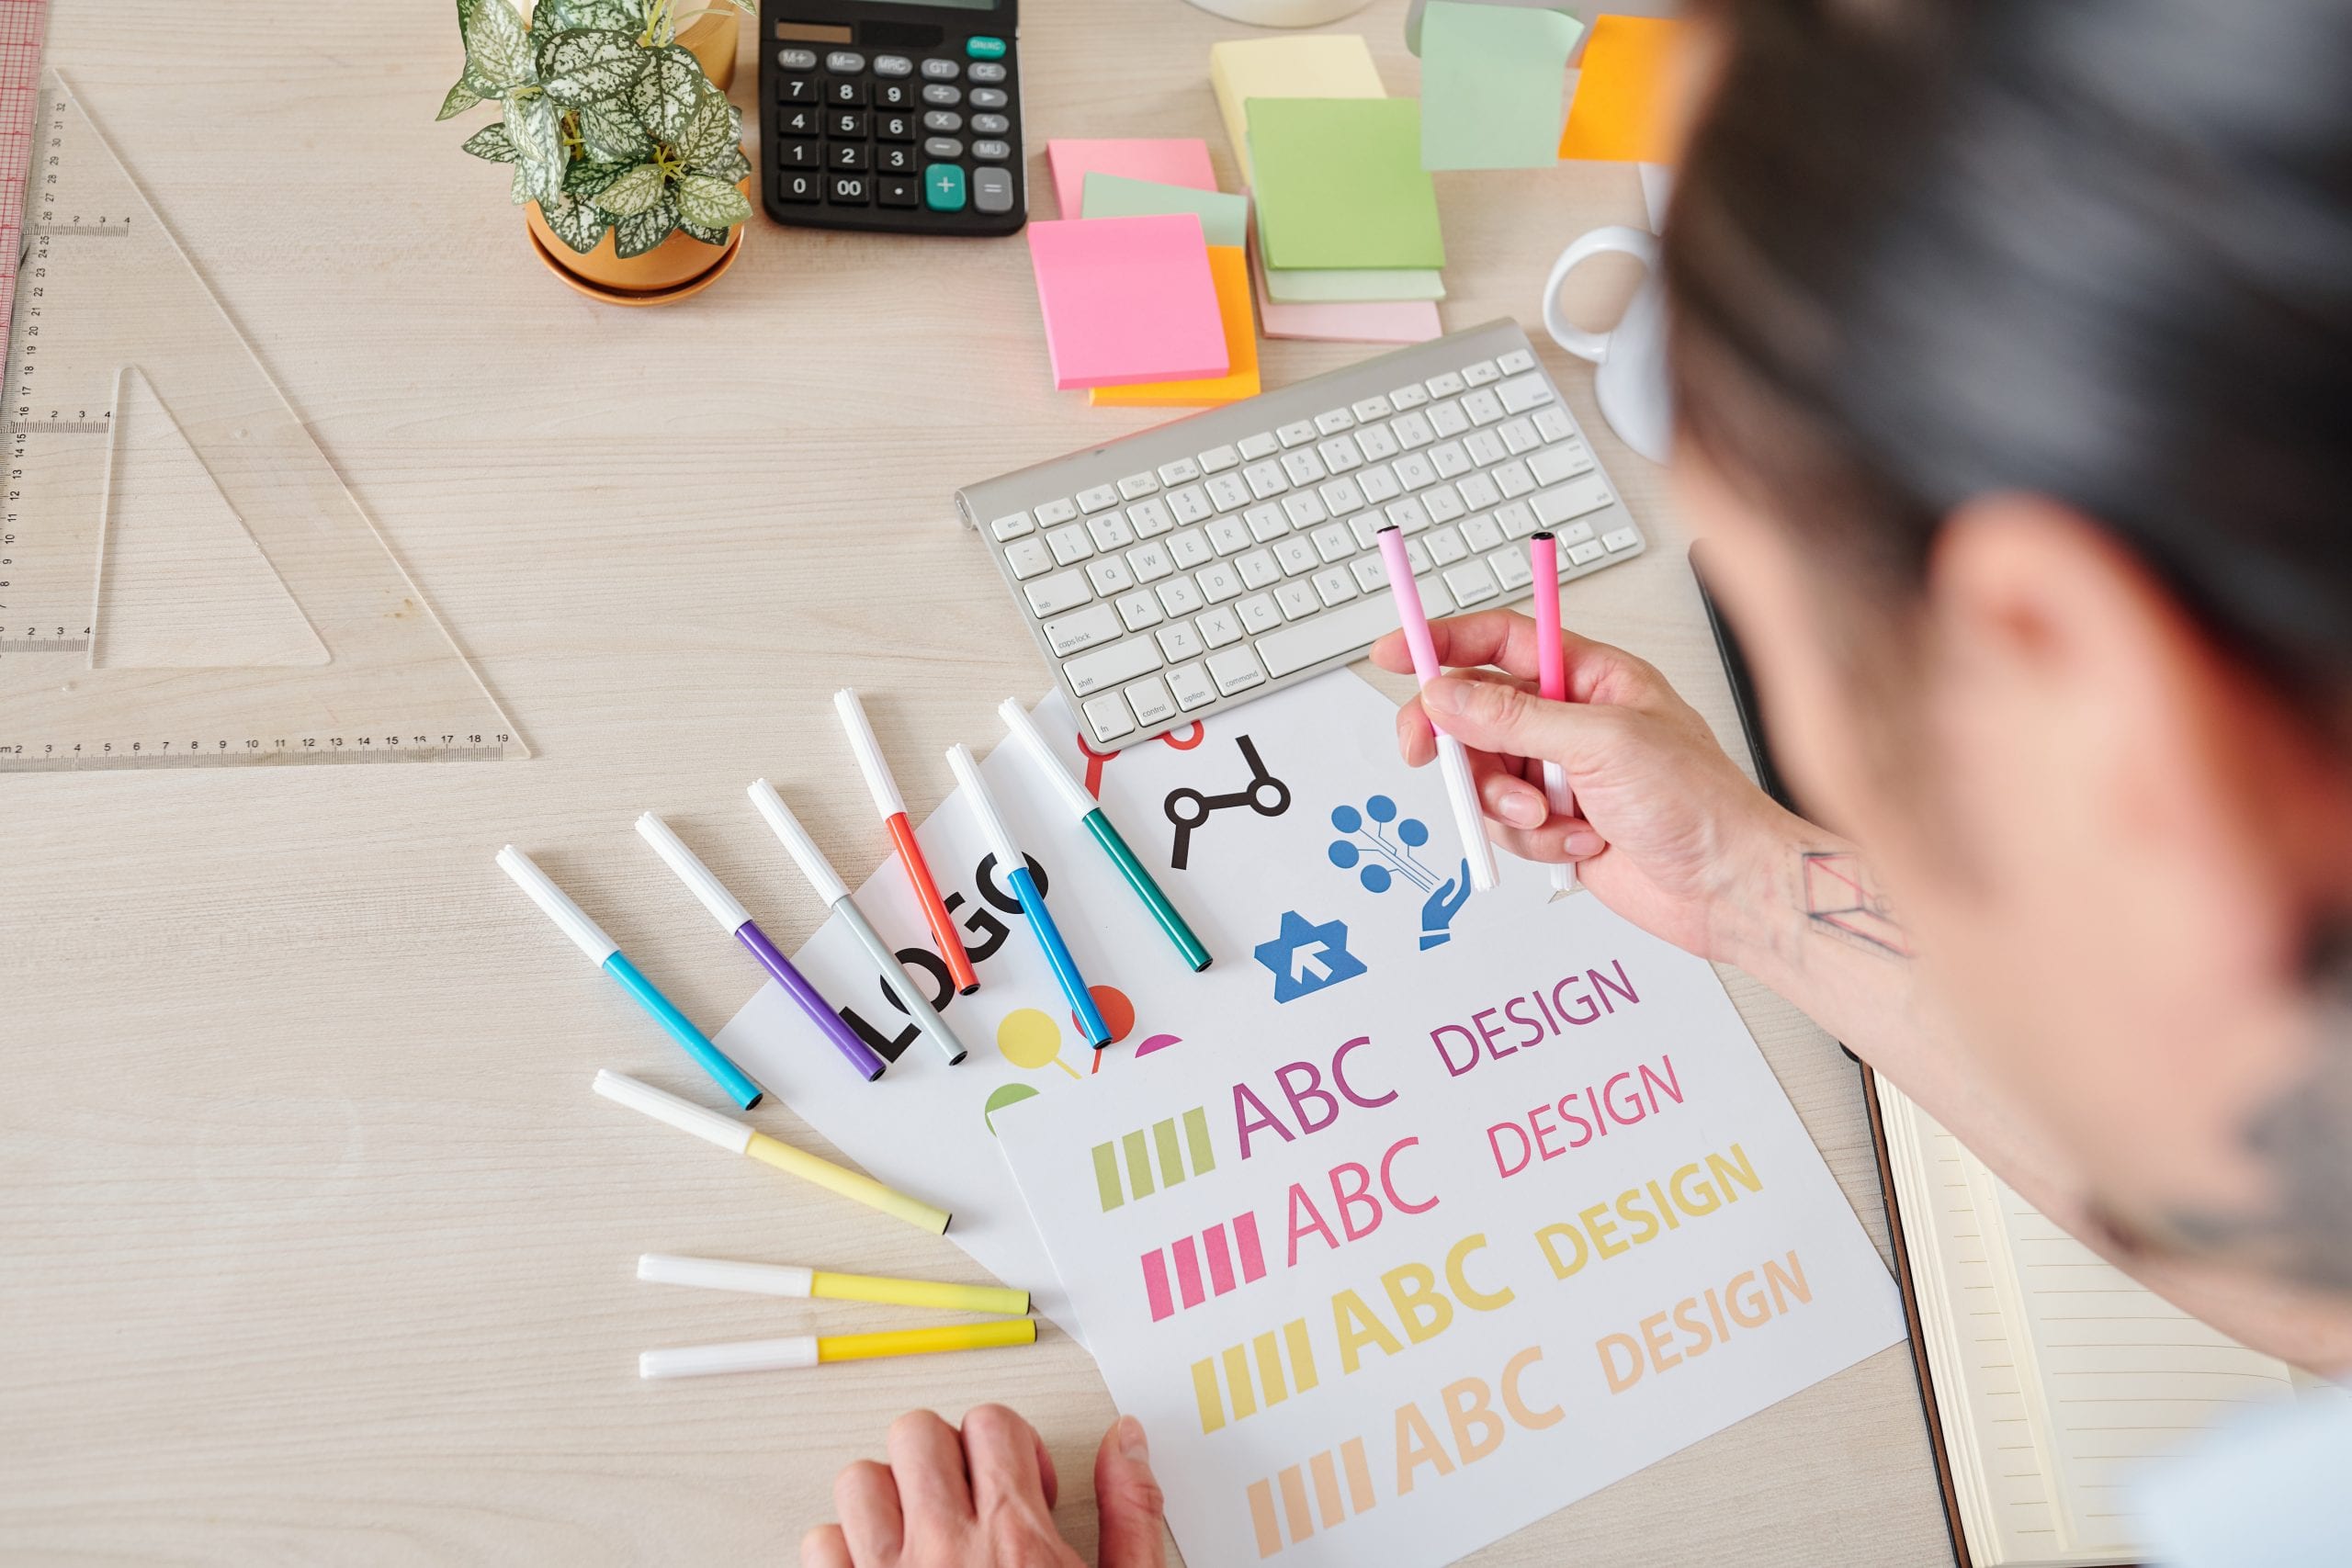 3 Tips on How to Become a Better Web Designer